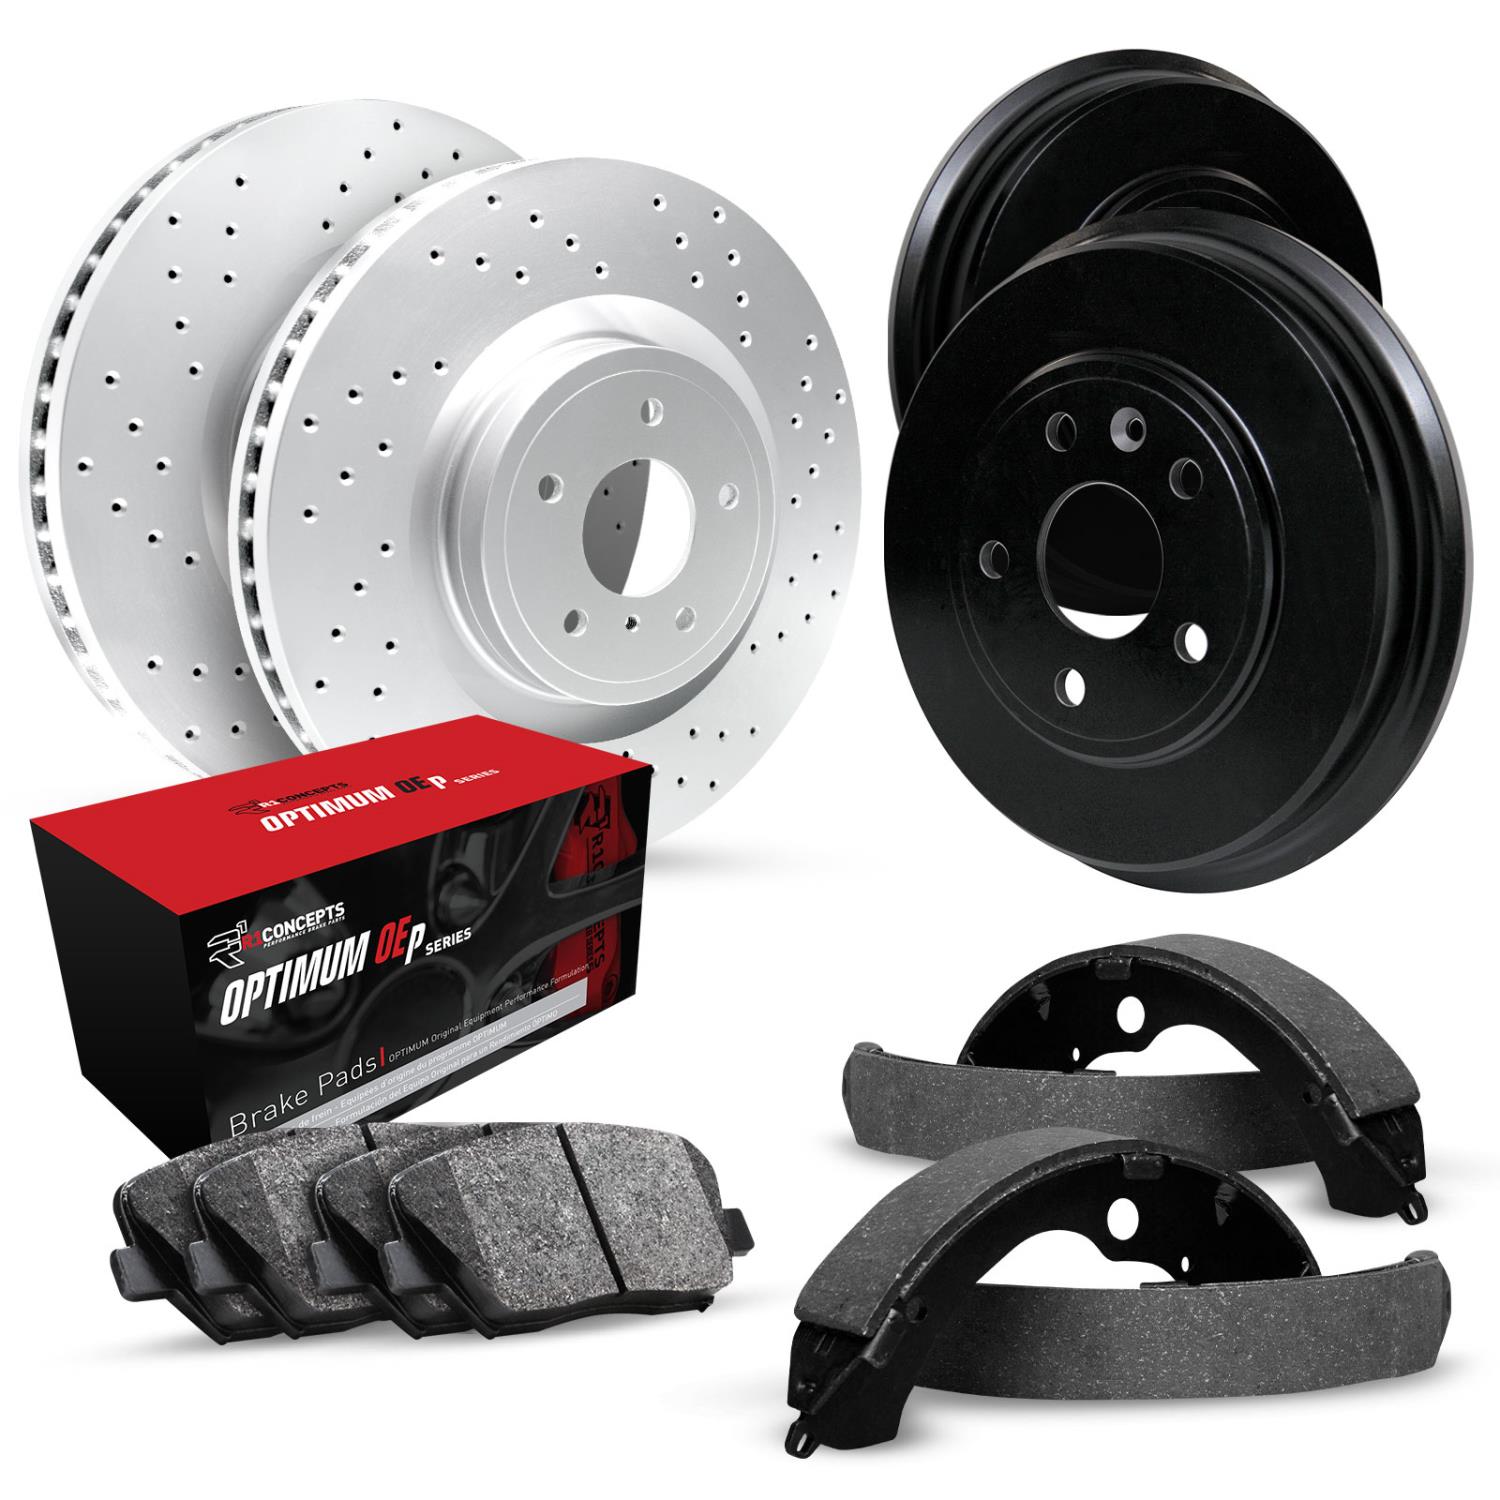 GEO-Carbon Drilled Brake Rotor & Drum Set w/Optimum OE Pads & Shoes, 1997-1999 GM, Position: Front & Rear